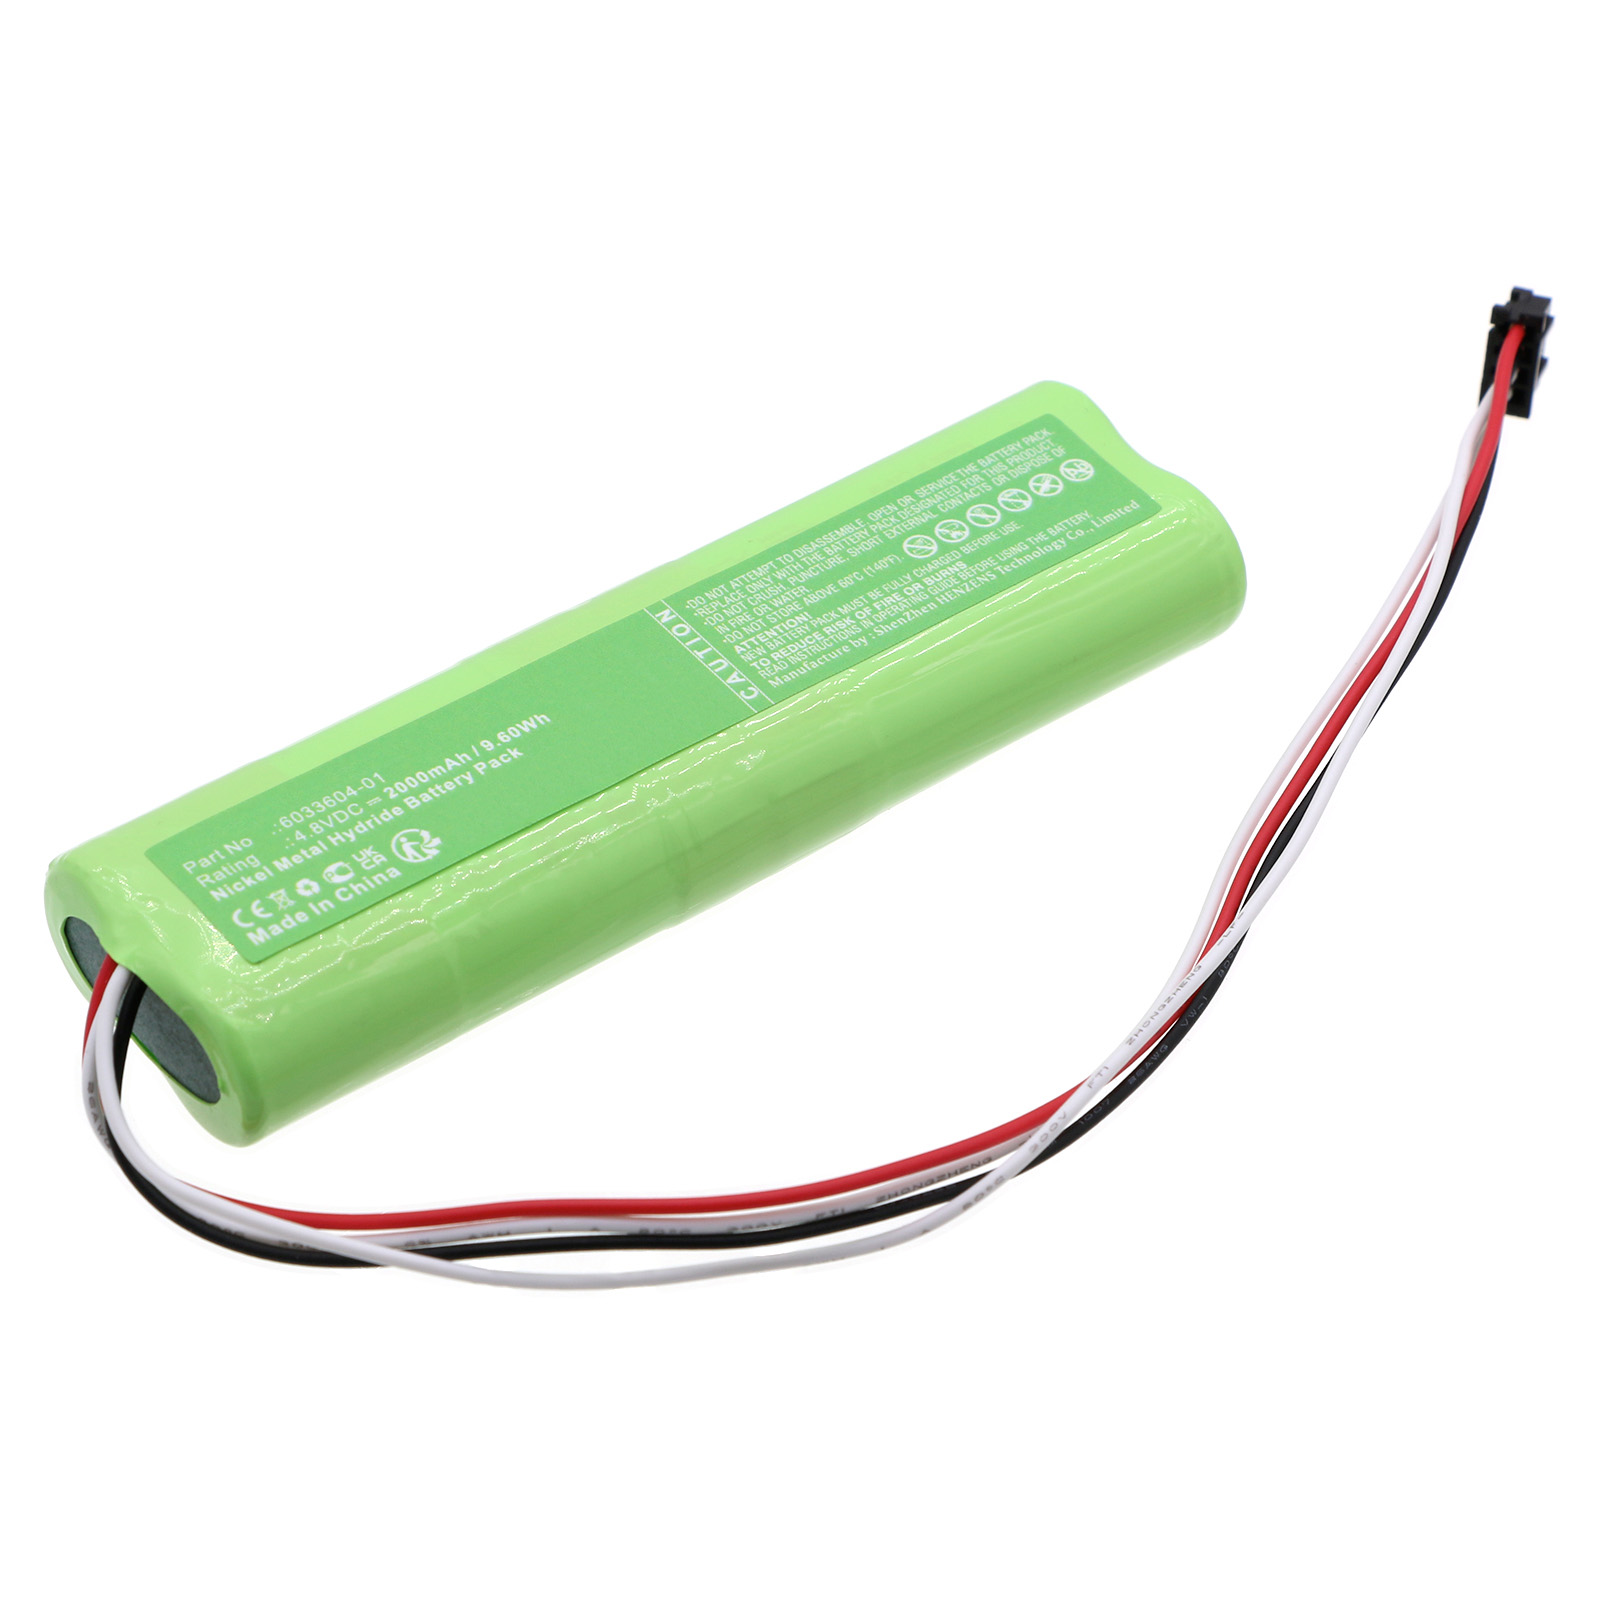 Synergy Digital Equipment Battery, Compatible with Drager 6033604-01 Equipment Battery (Ni-MH, 4.8V, 2000mAh)